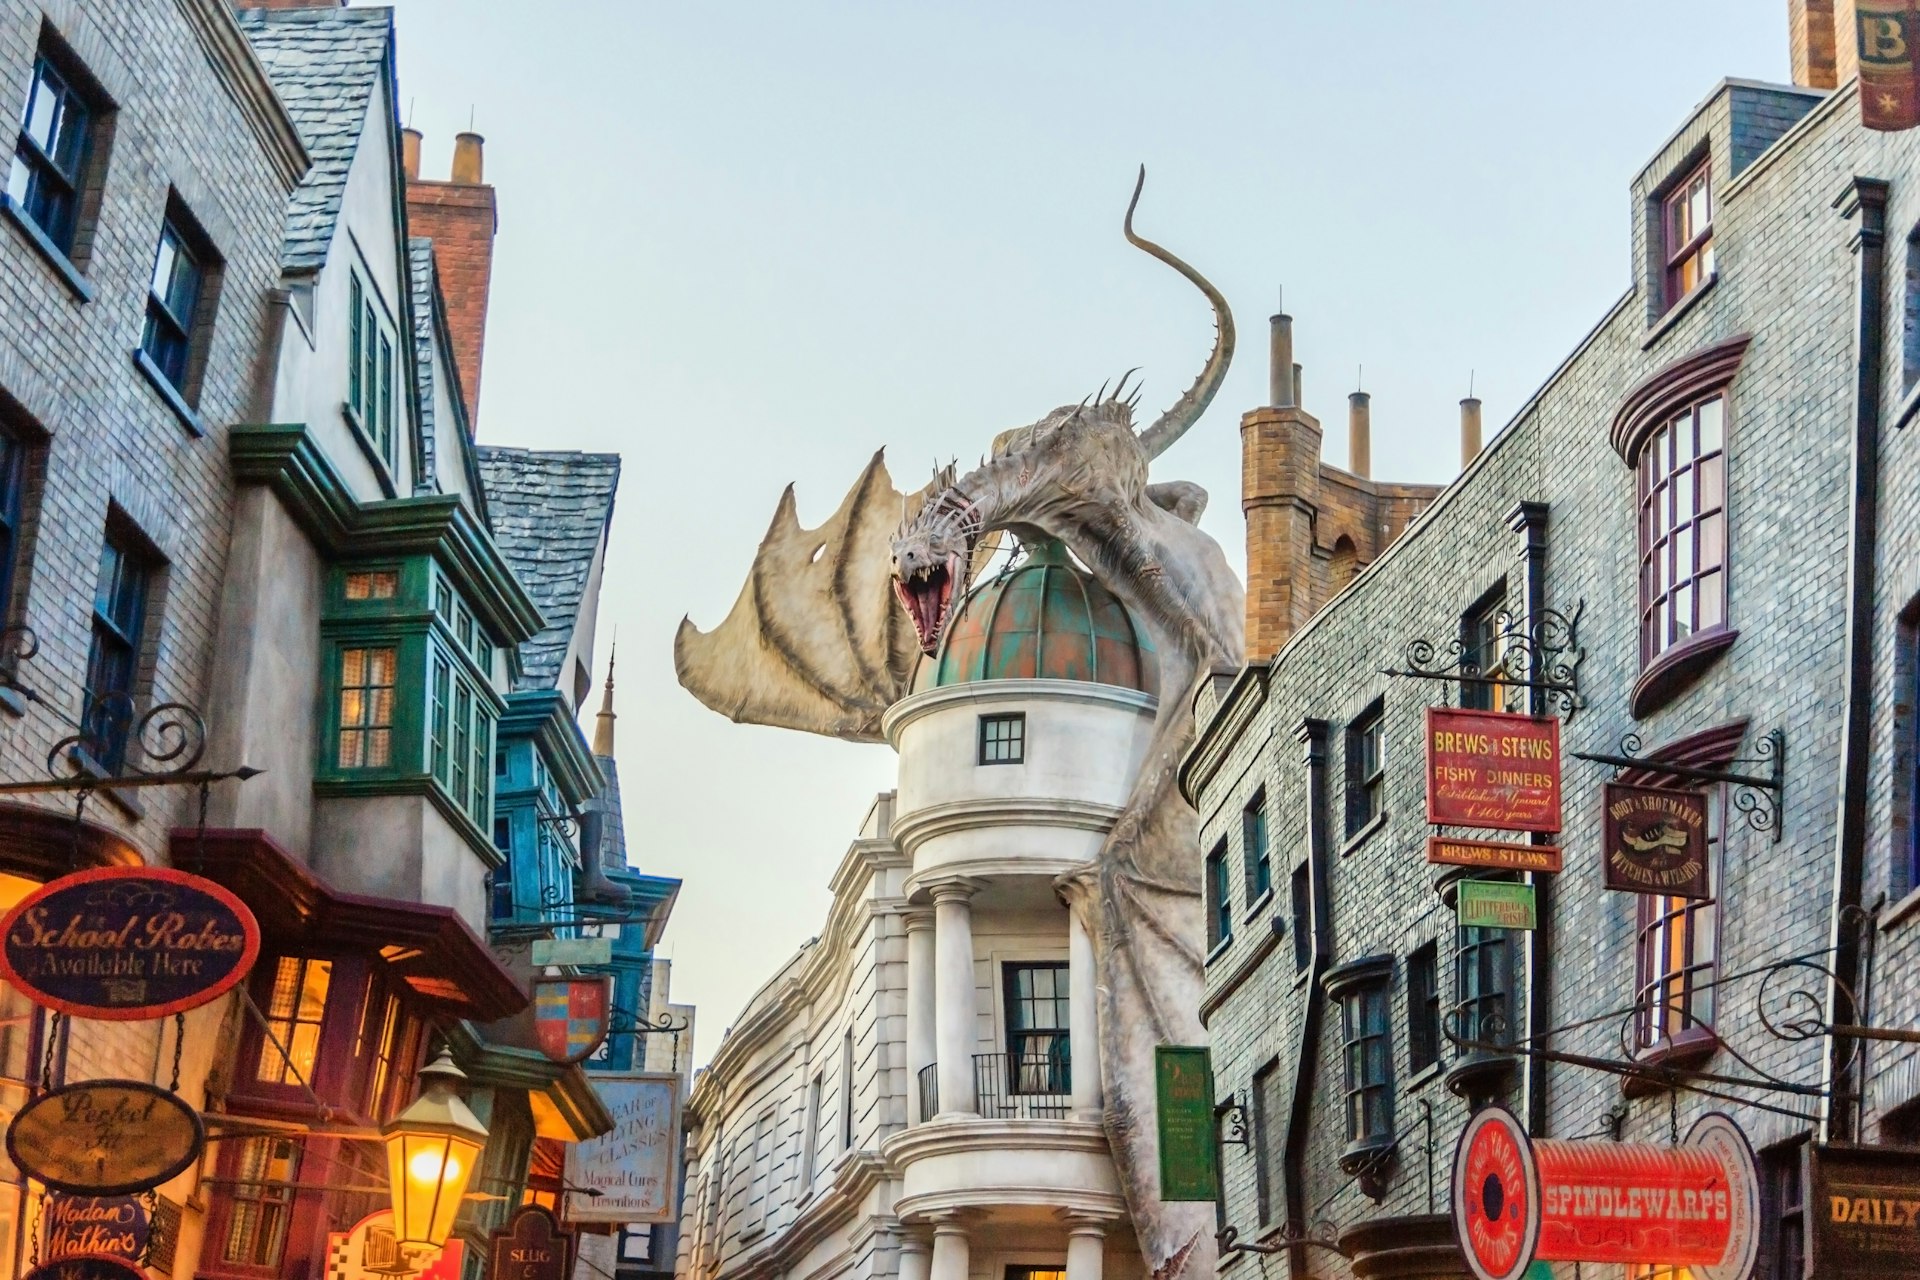 Diagon Alley in The Wizarding World of Harry Potter at Universal Studios Orlando. 